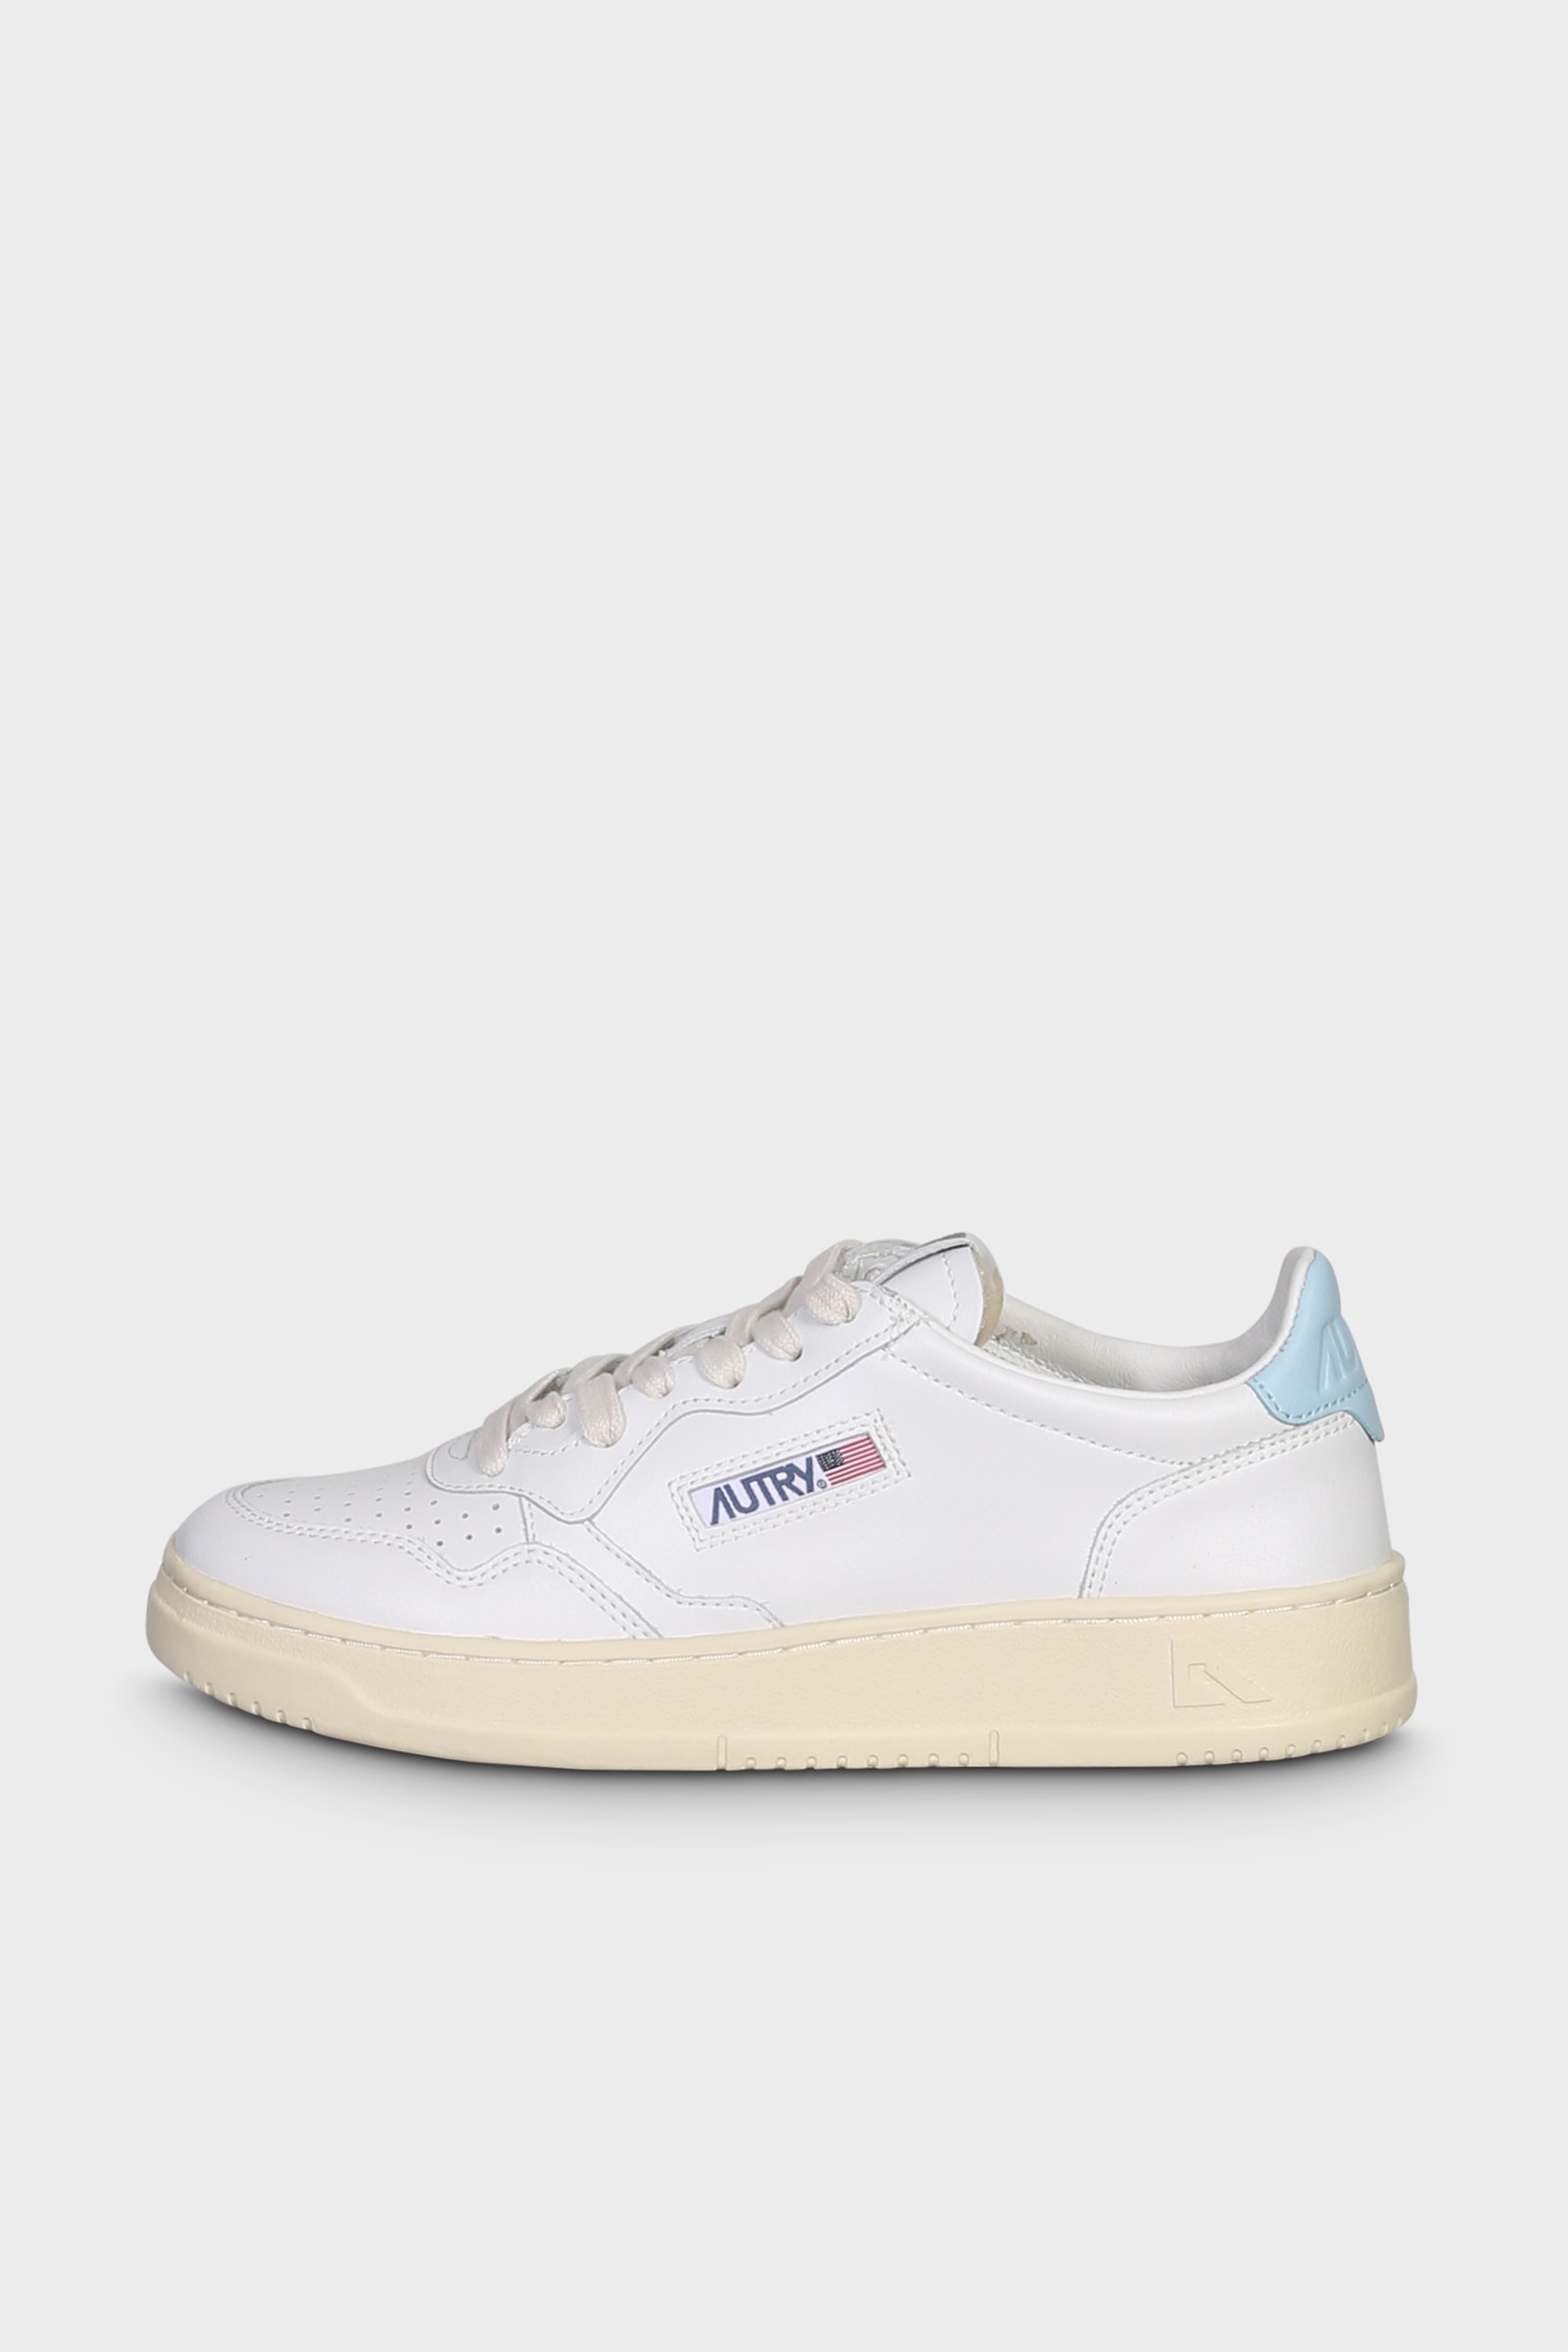 AUTRY ACTION SHOES Medalist Low Sneaker in White/Stream Blue